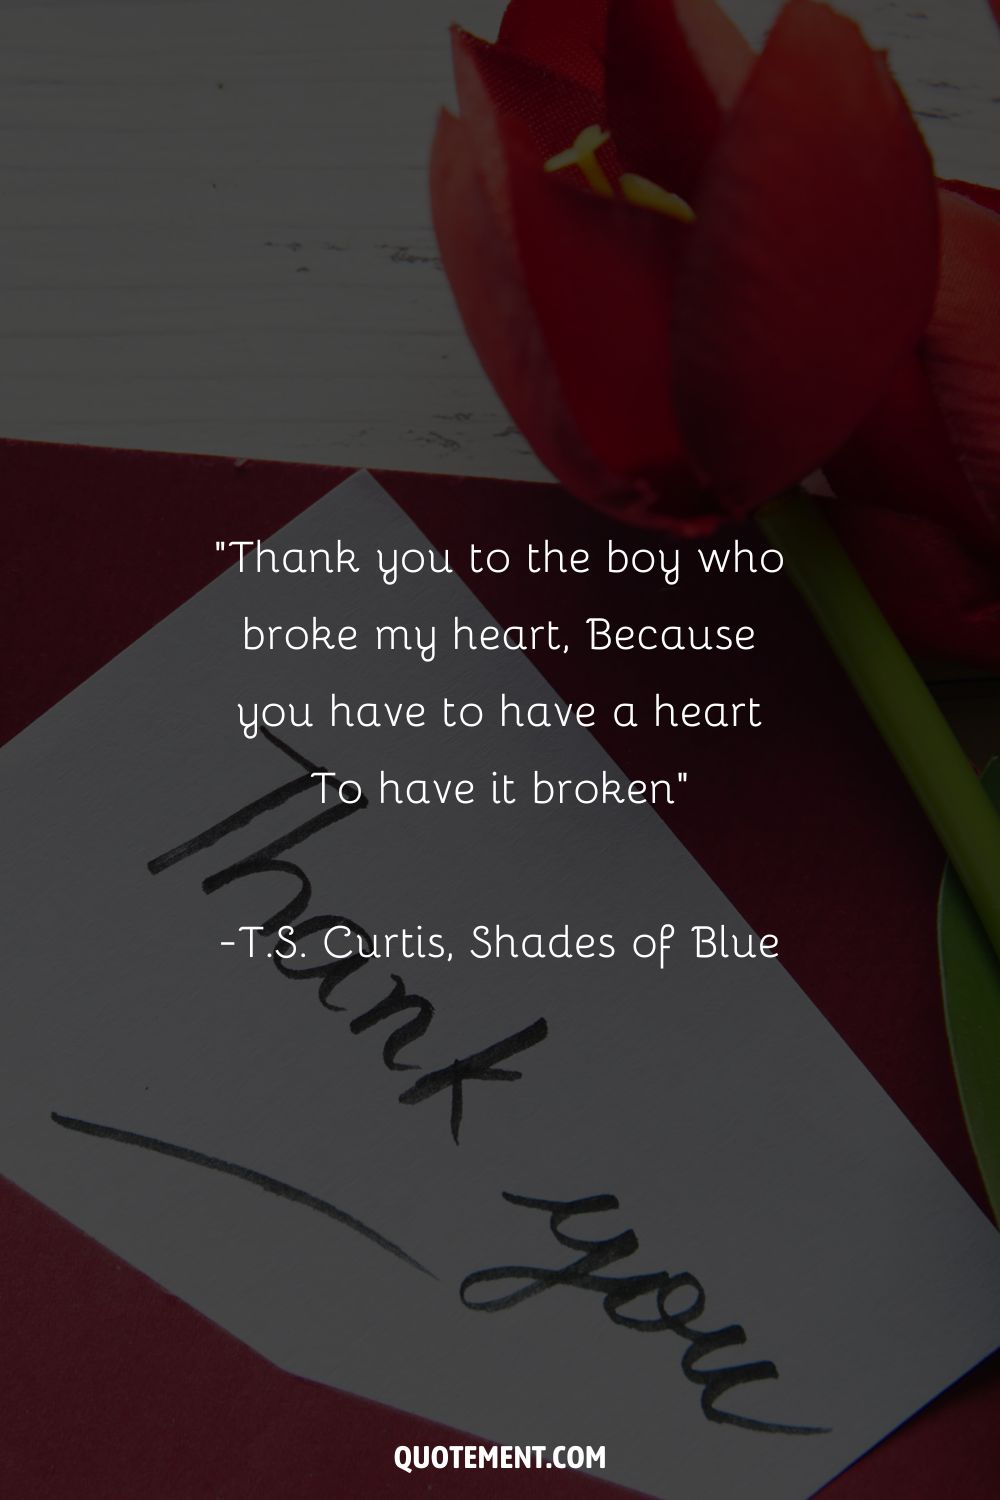 Thank you to the boy who broke my heart